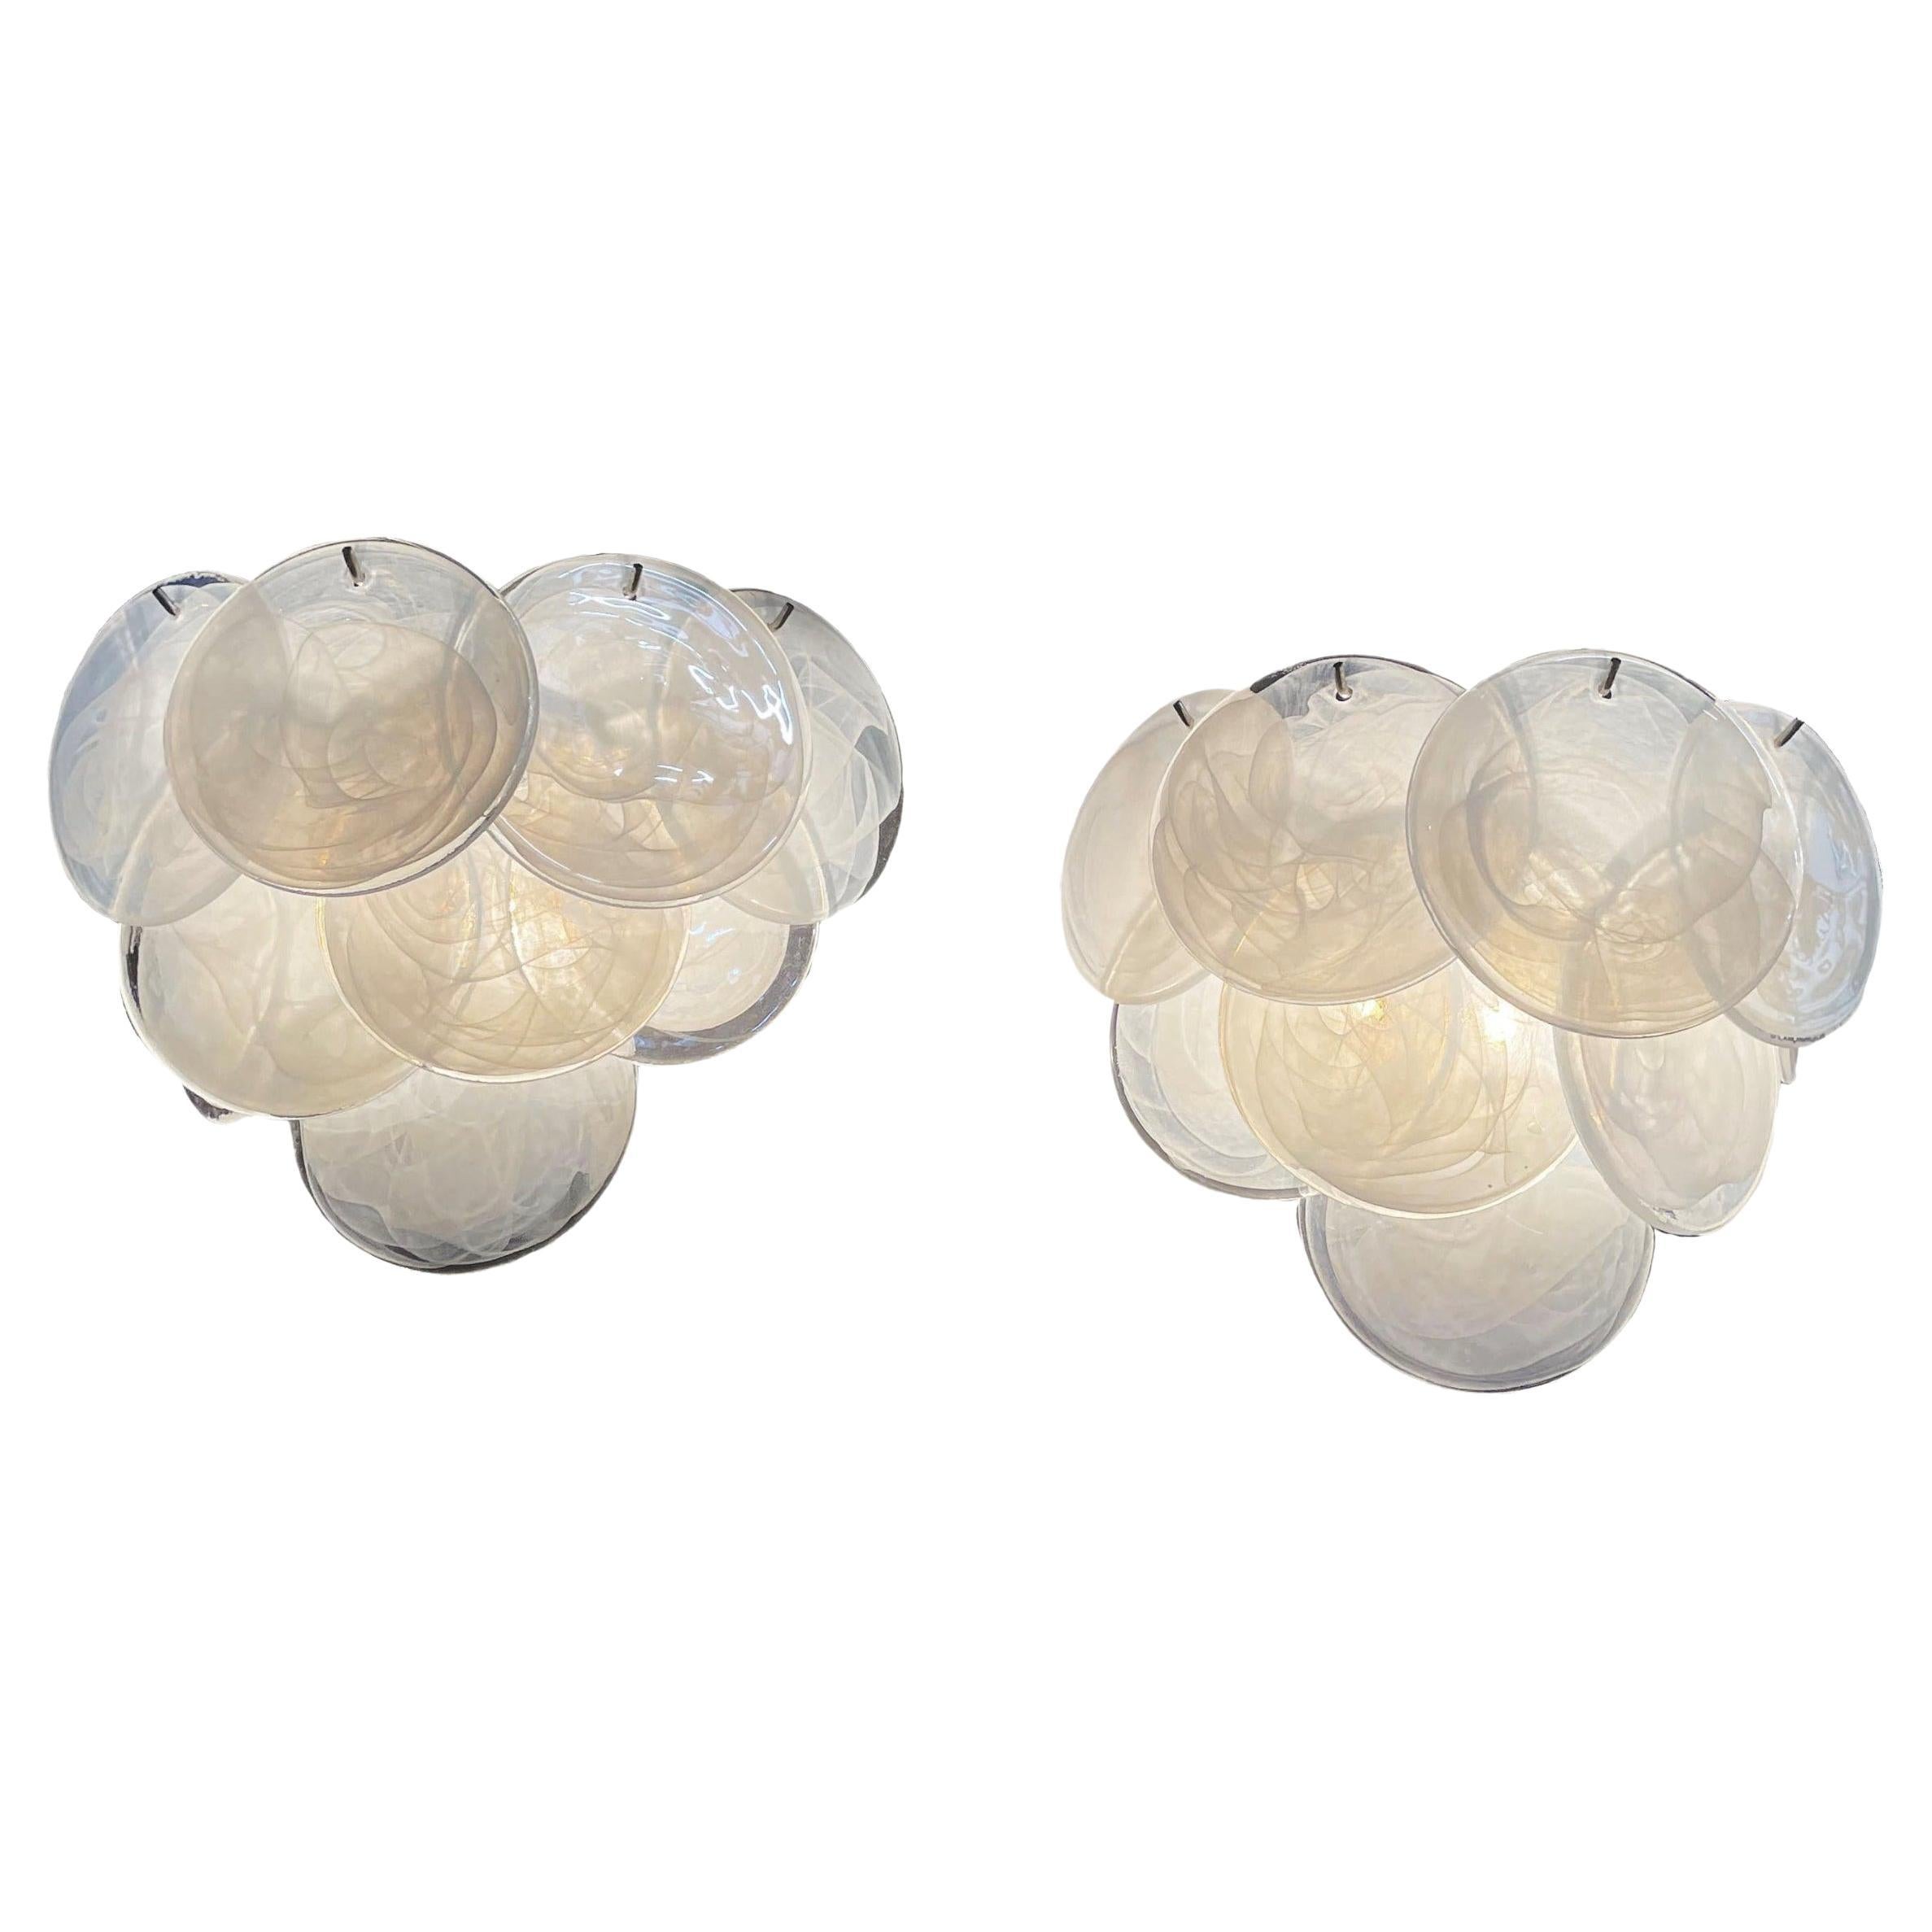 Elegant Pair of glass wall sconces - 10 alabaster white disks For Sale